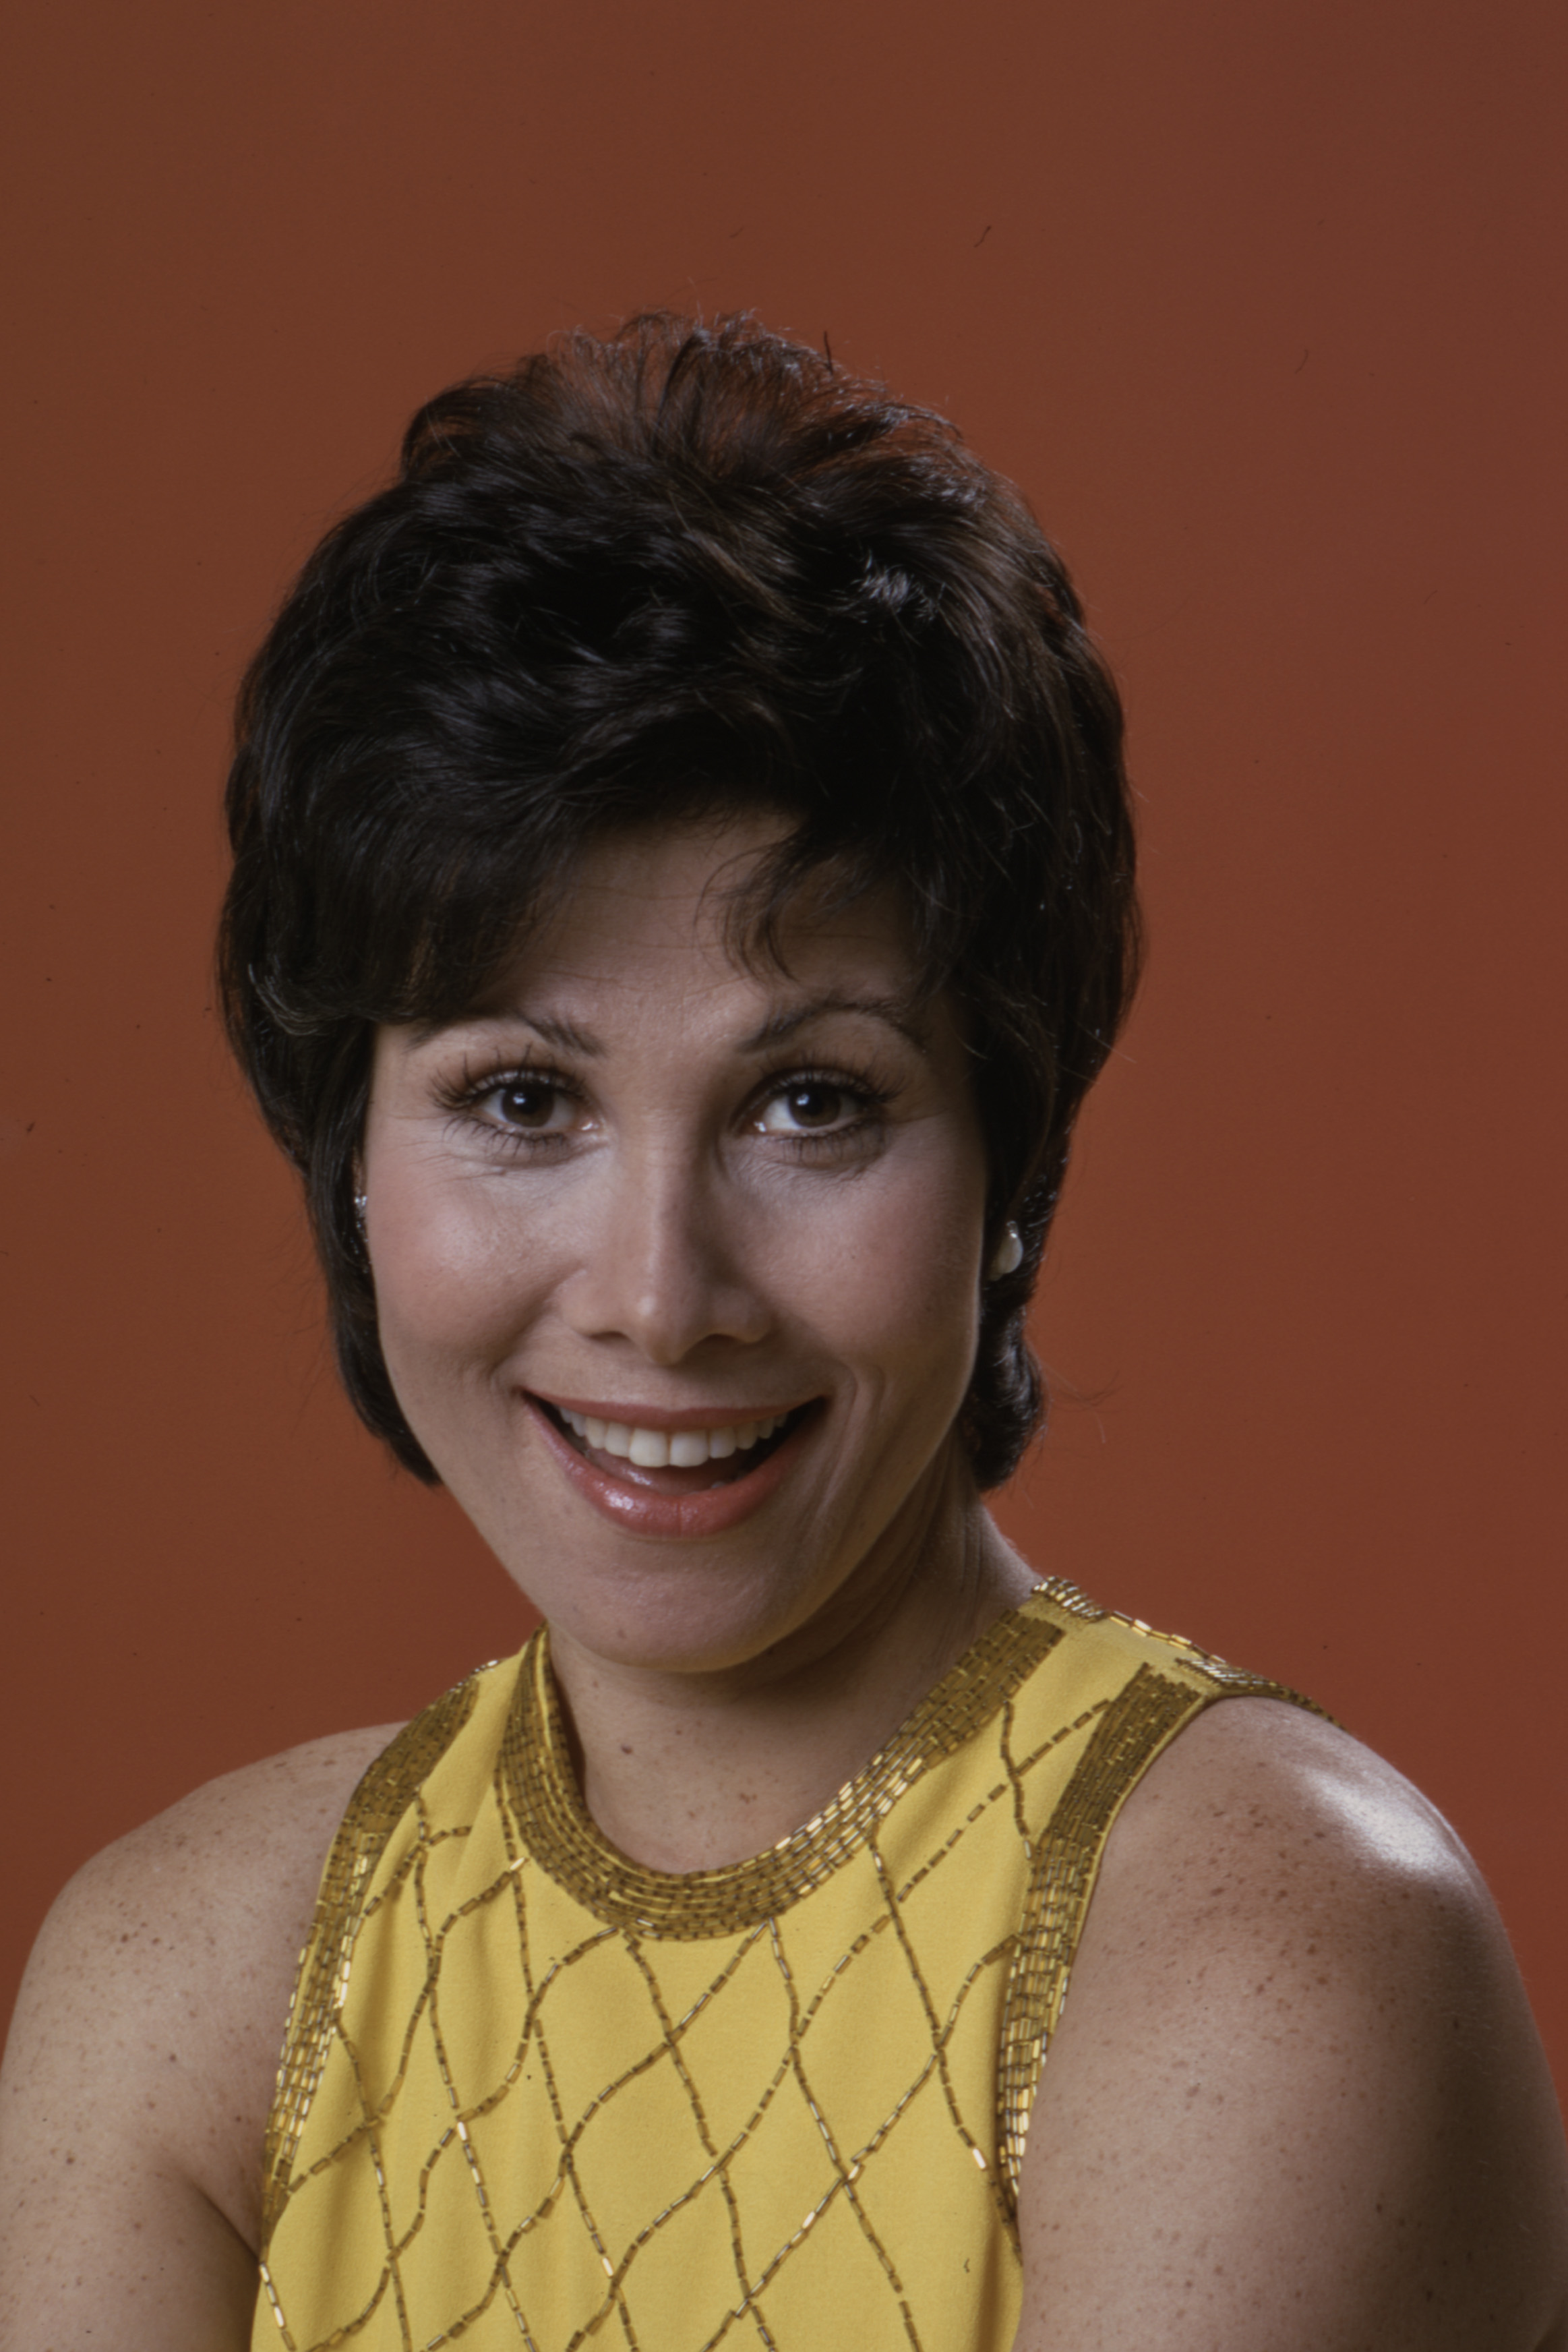 Michele Lee in a promotional photo for the Tony Awards in New York, 1975 | Source: Getty Images